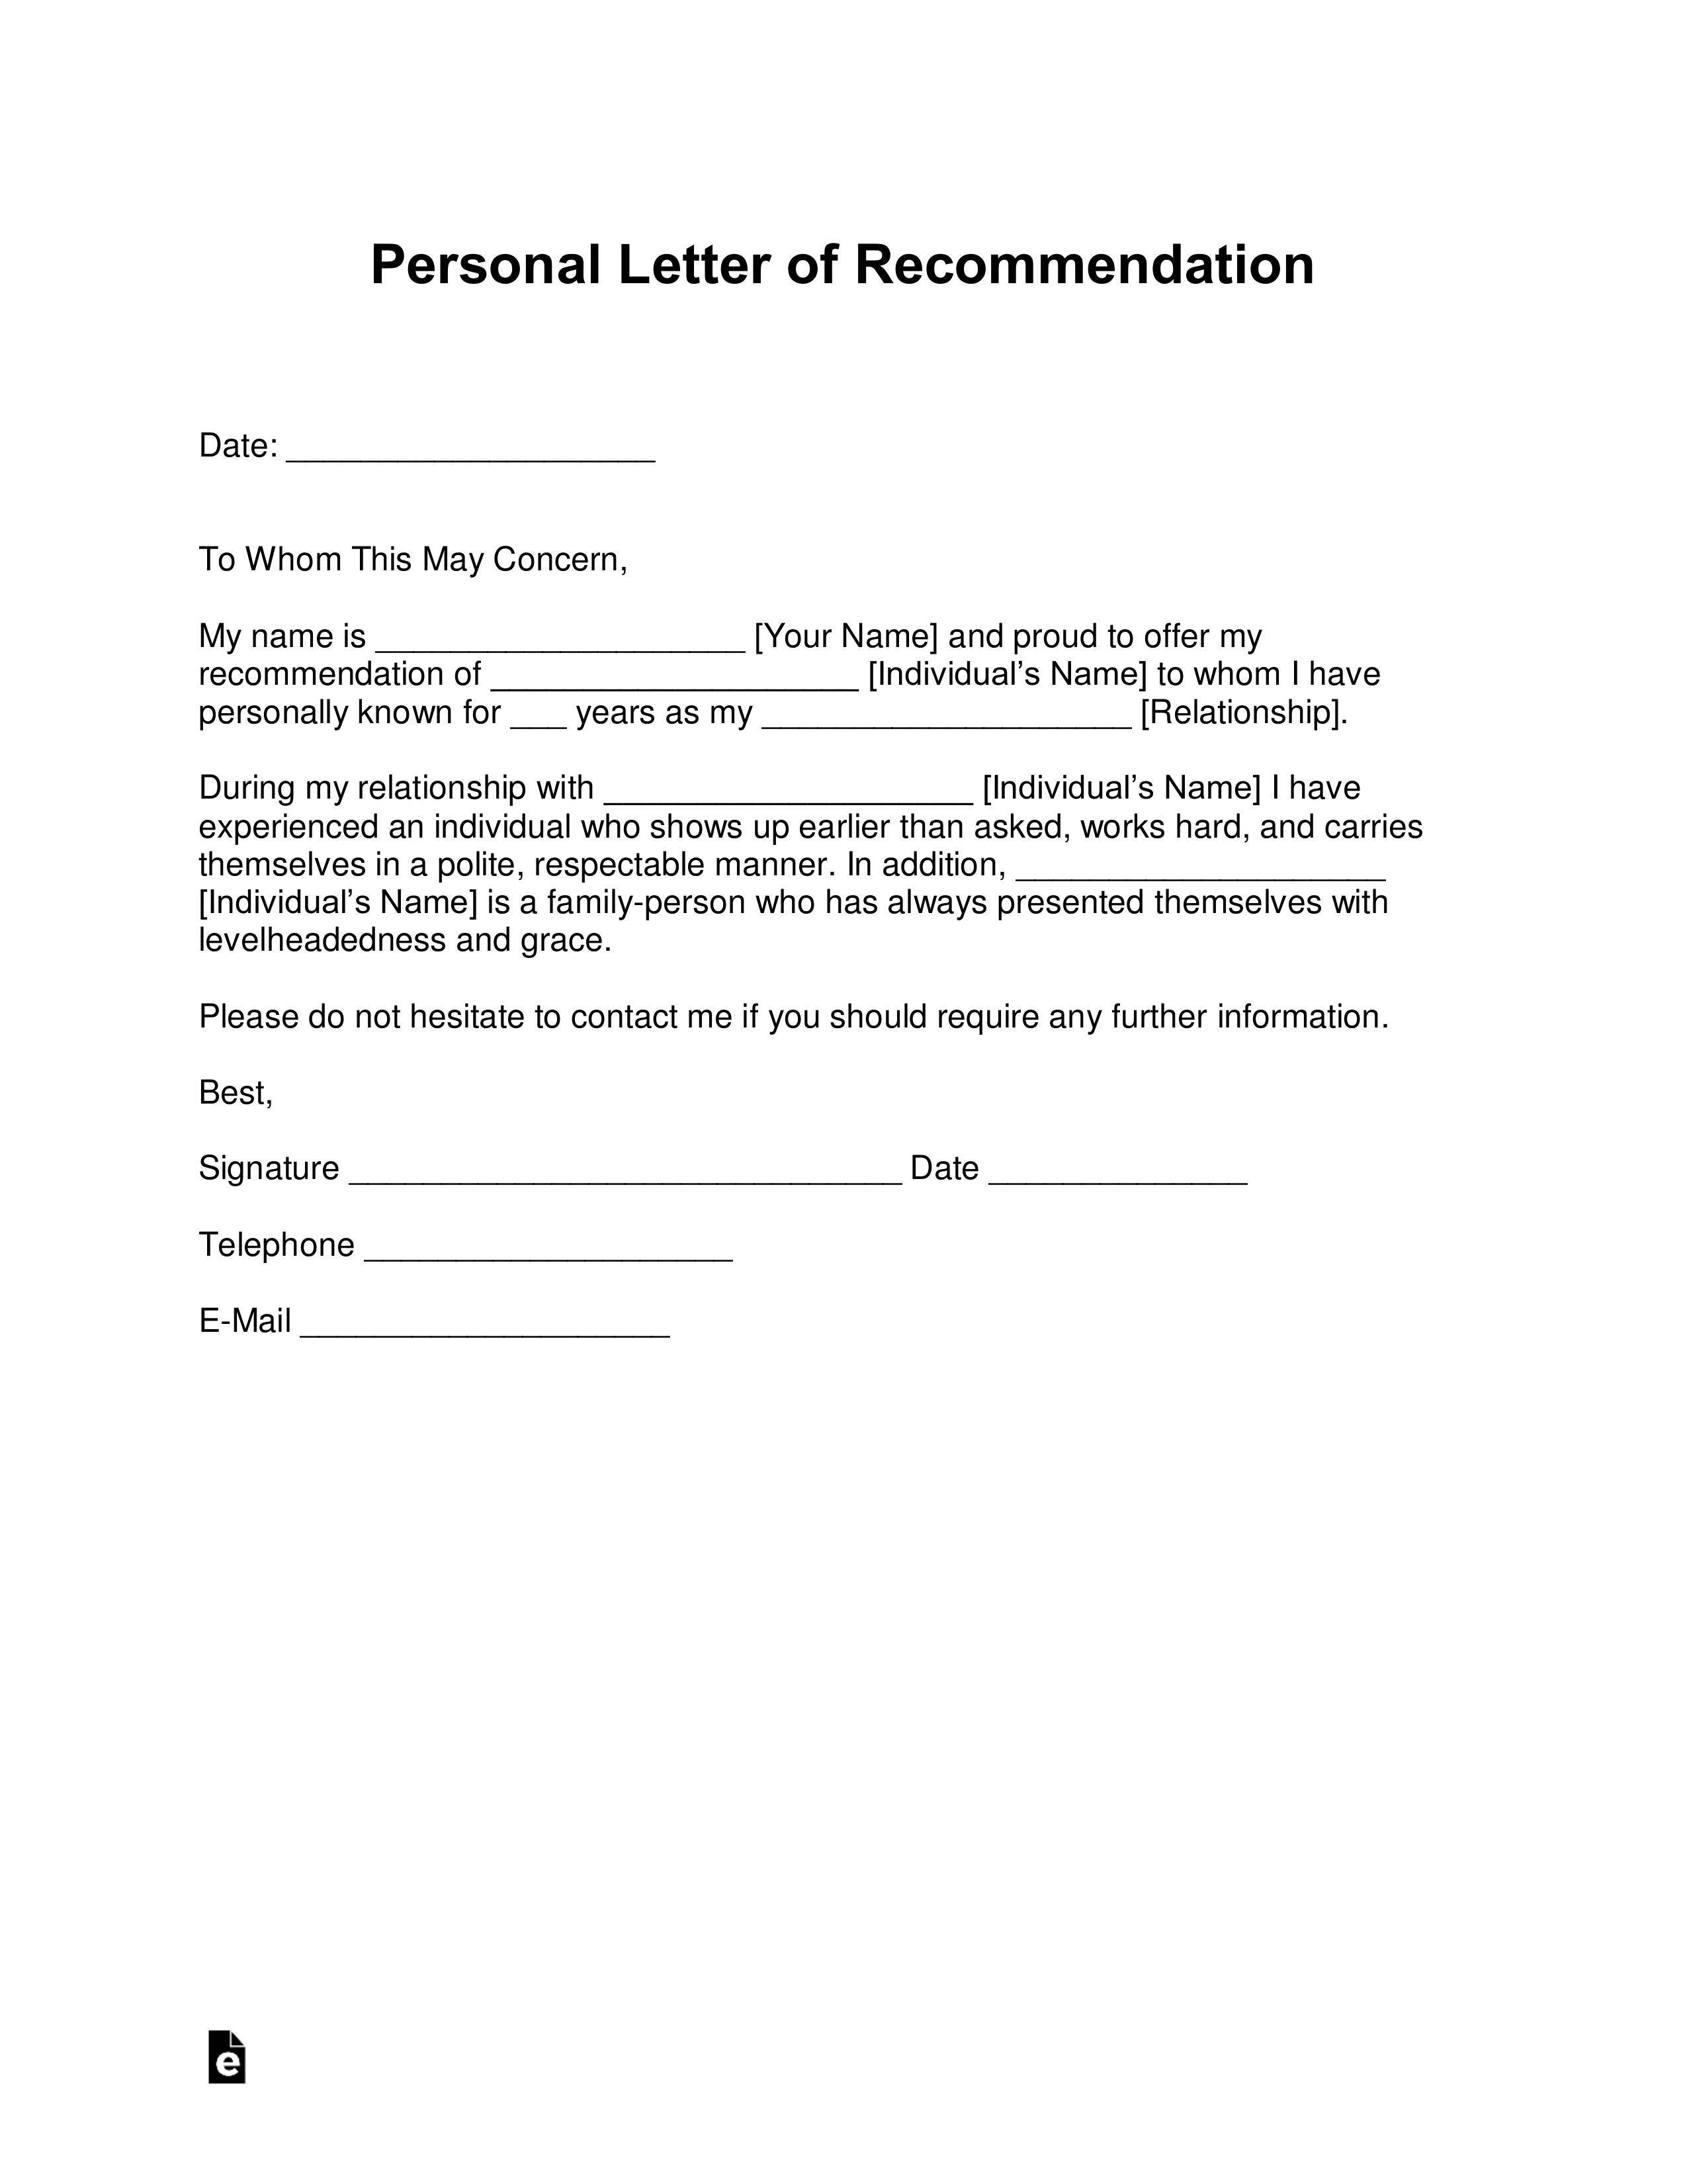 Free Personal Letter of Recommendation Template (For a Friend